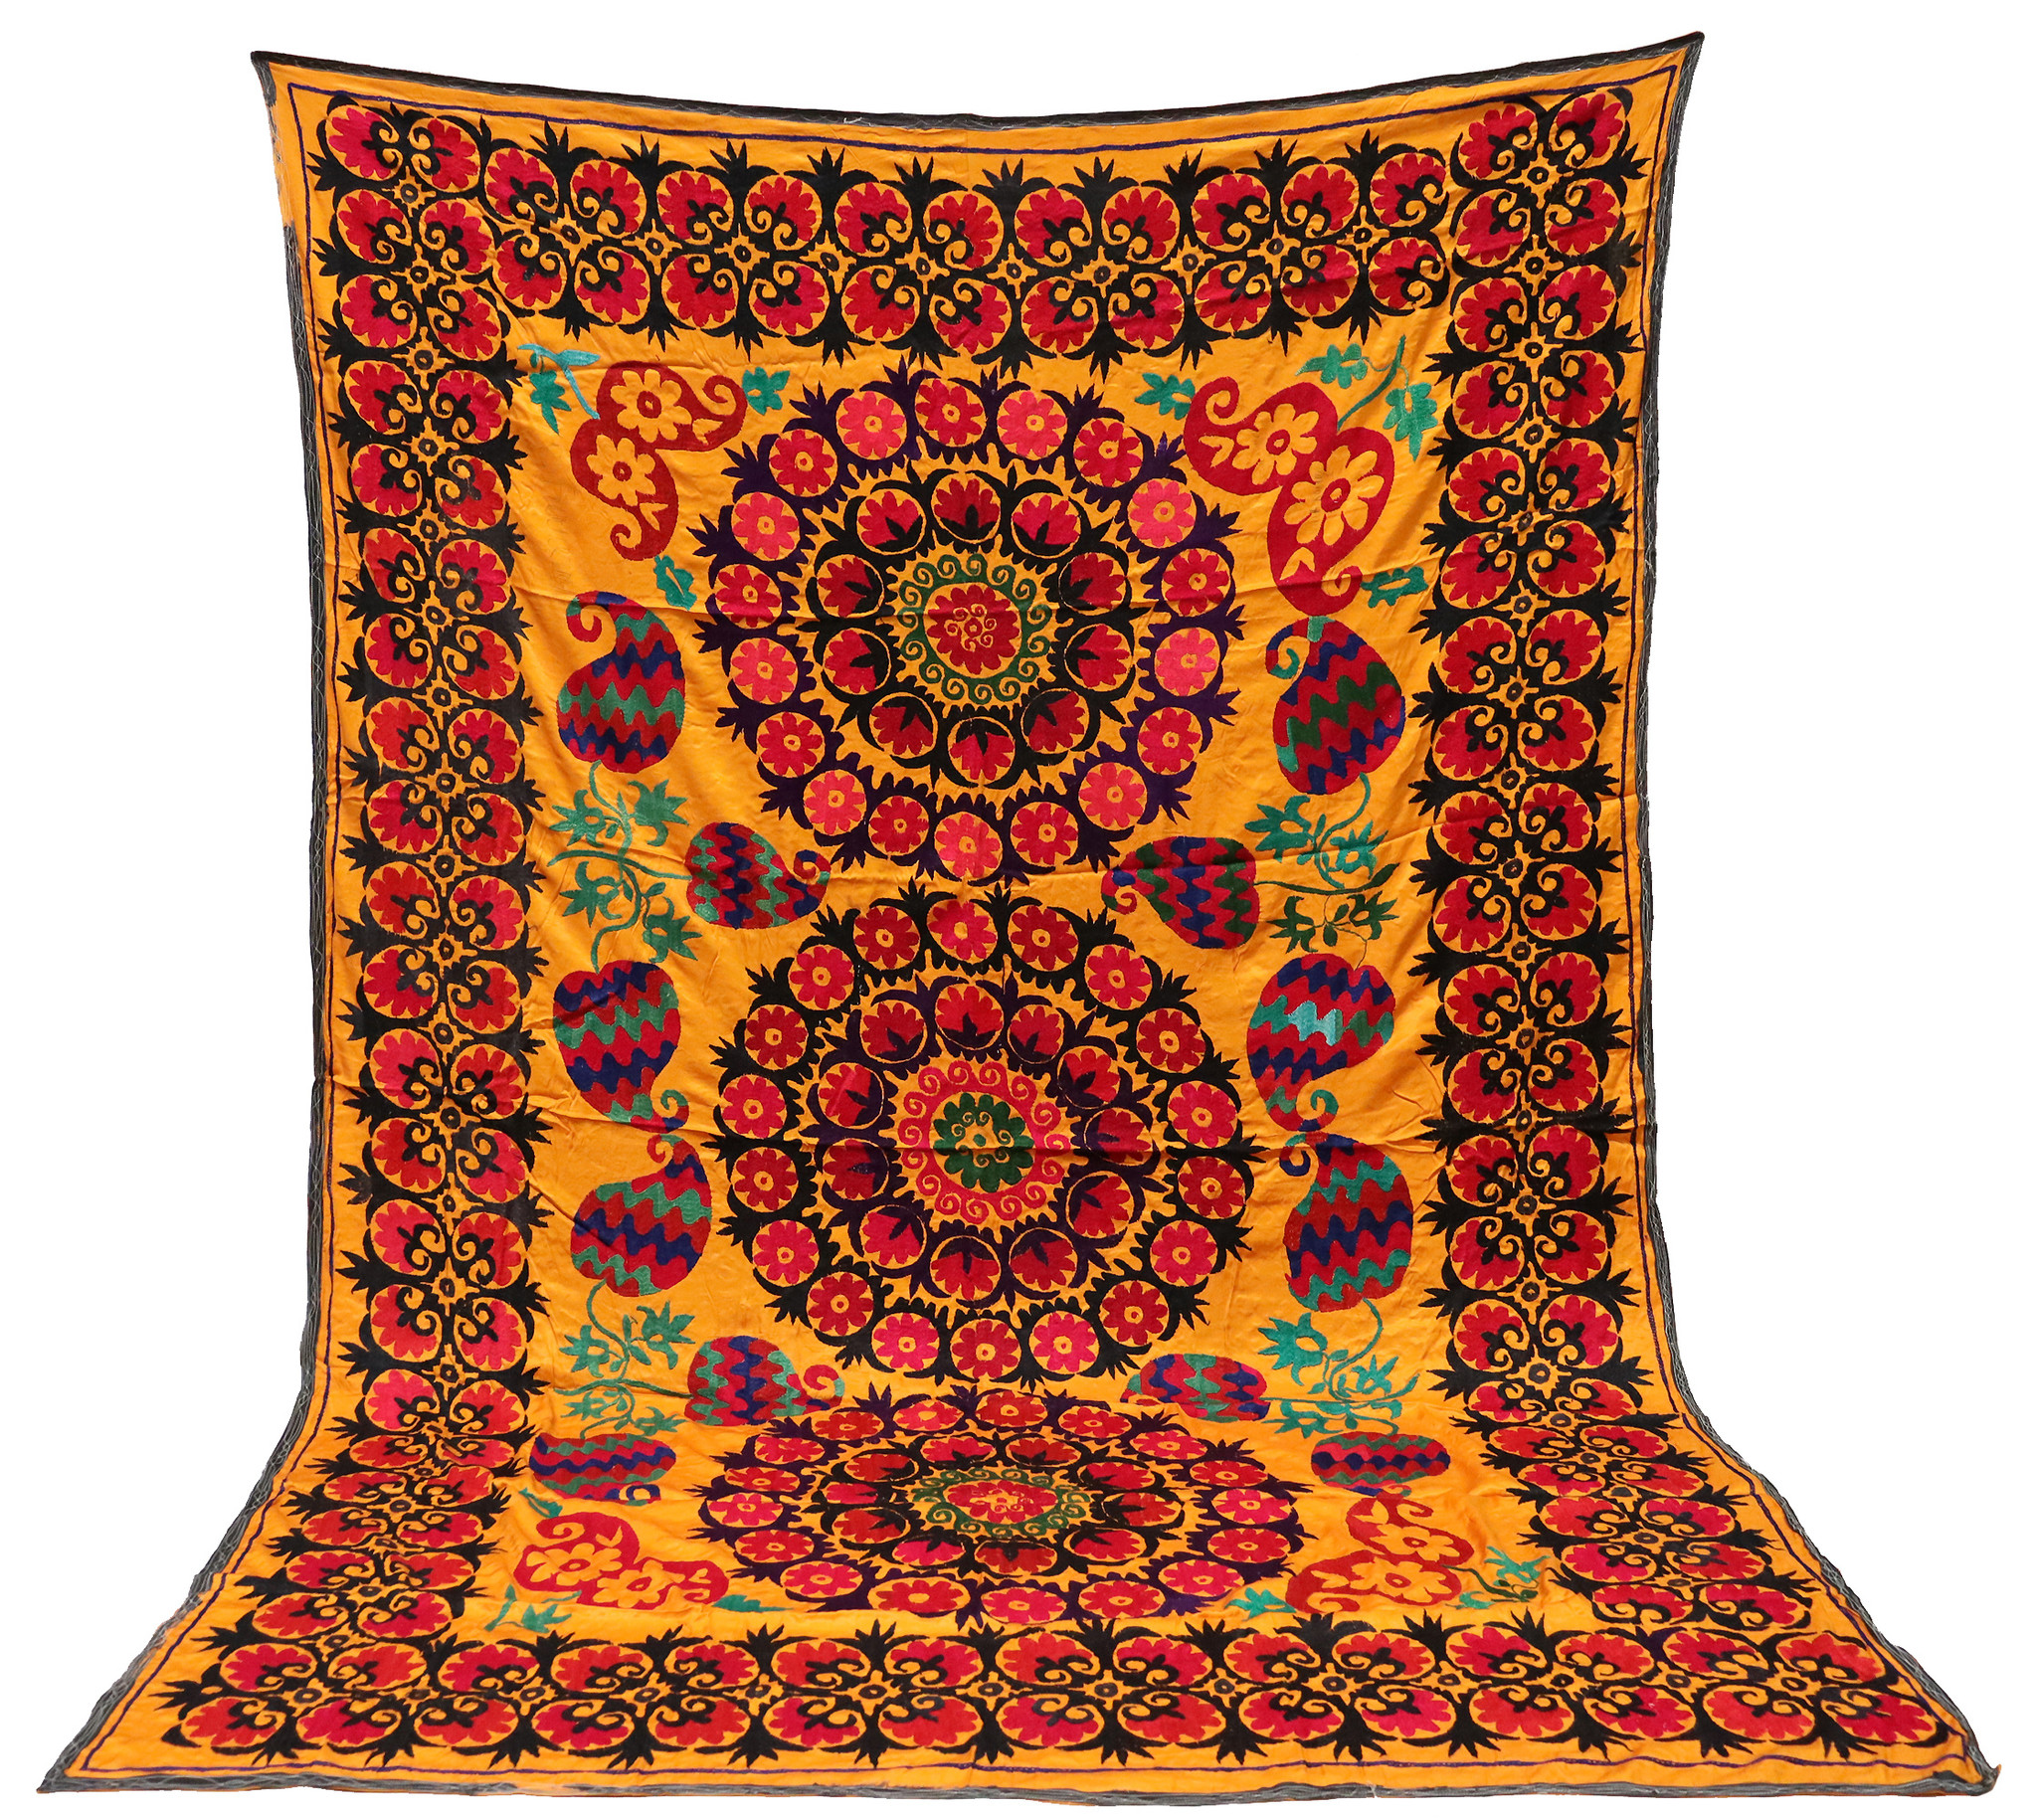 290x195 cm Hand Embroidered suzani from Uzbekistan.Tablecloth, Wall hanging, Bedspread,Bedcover No.UZ-43